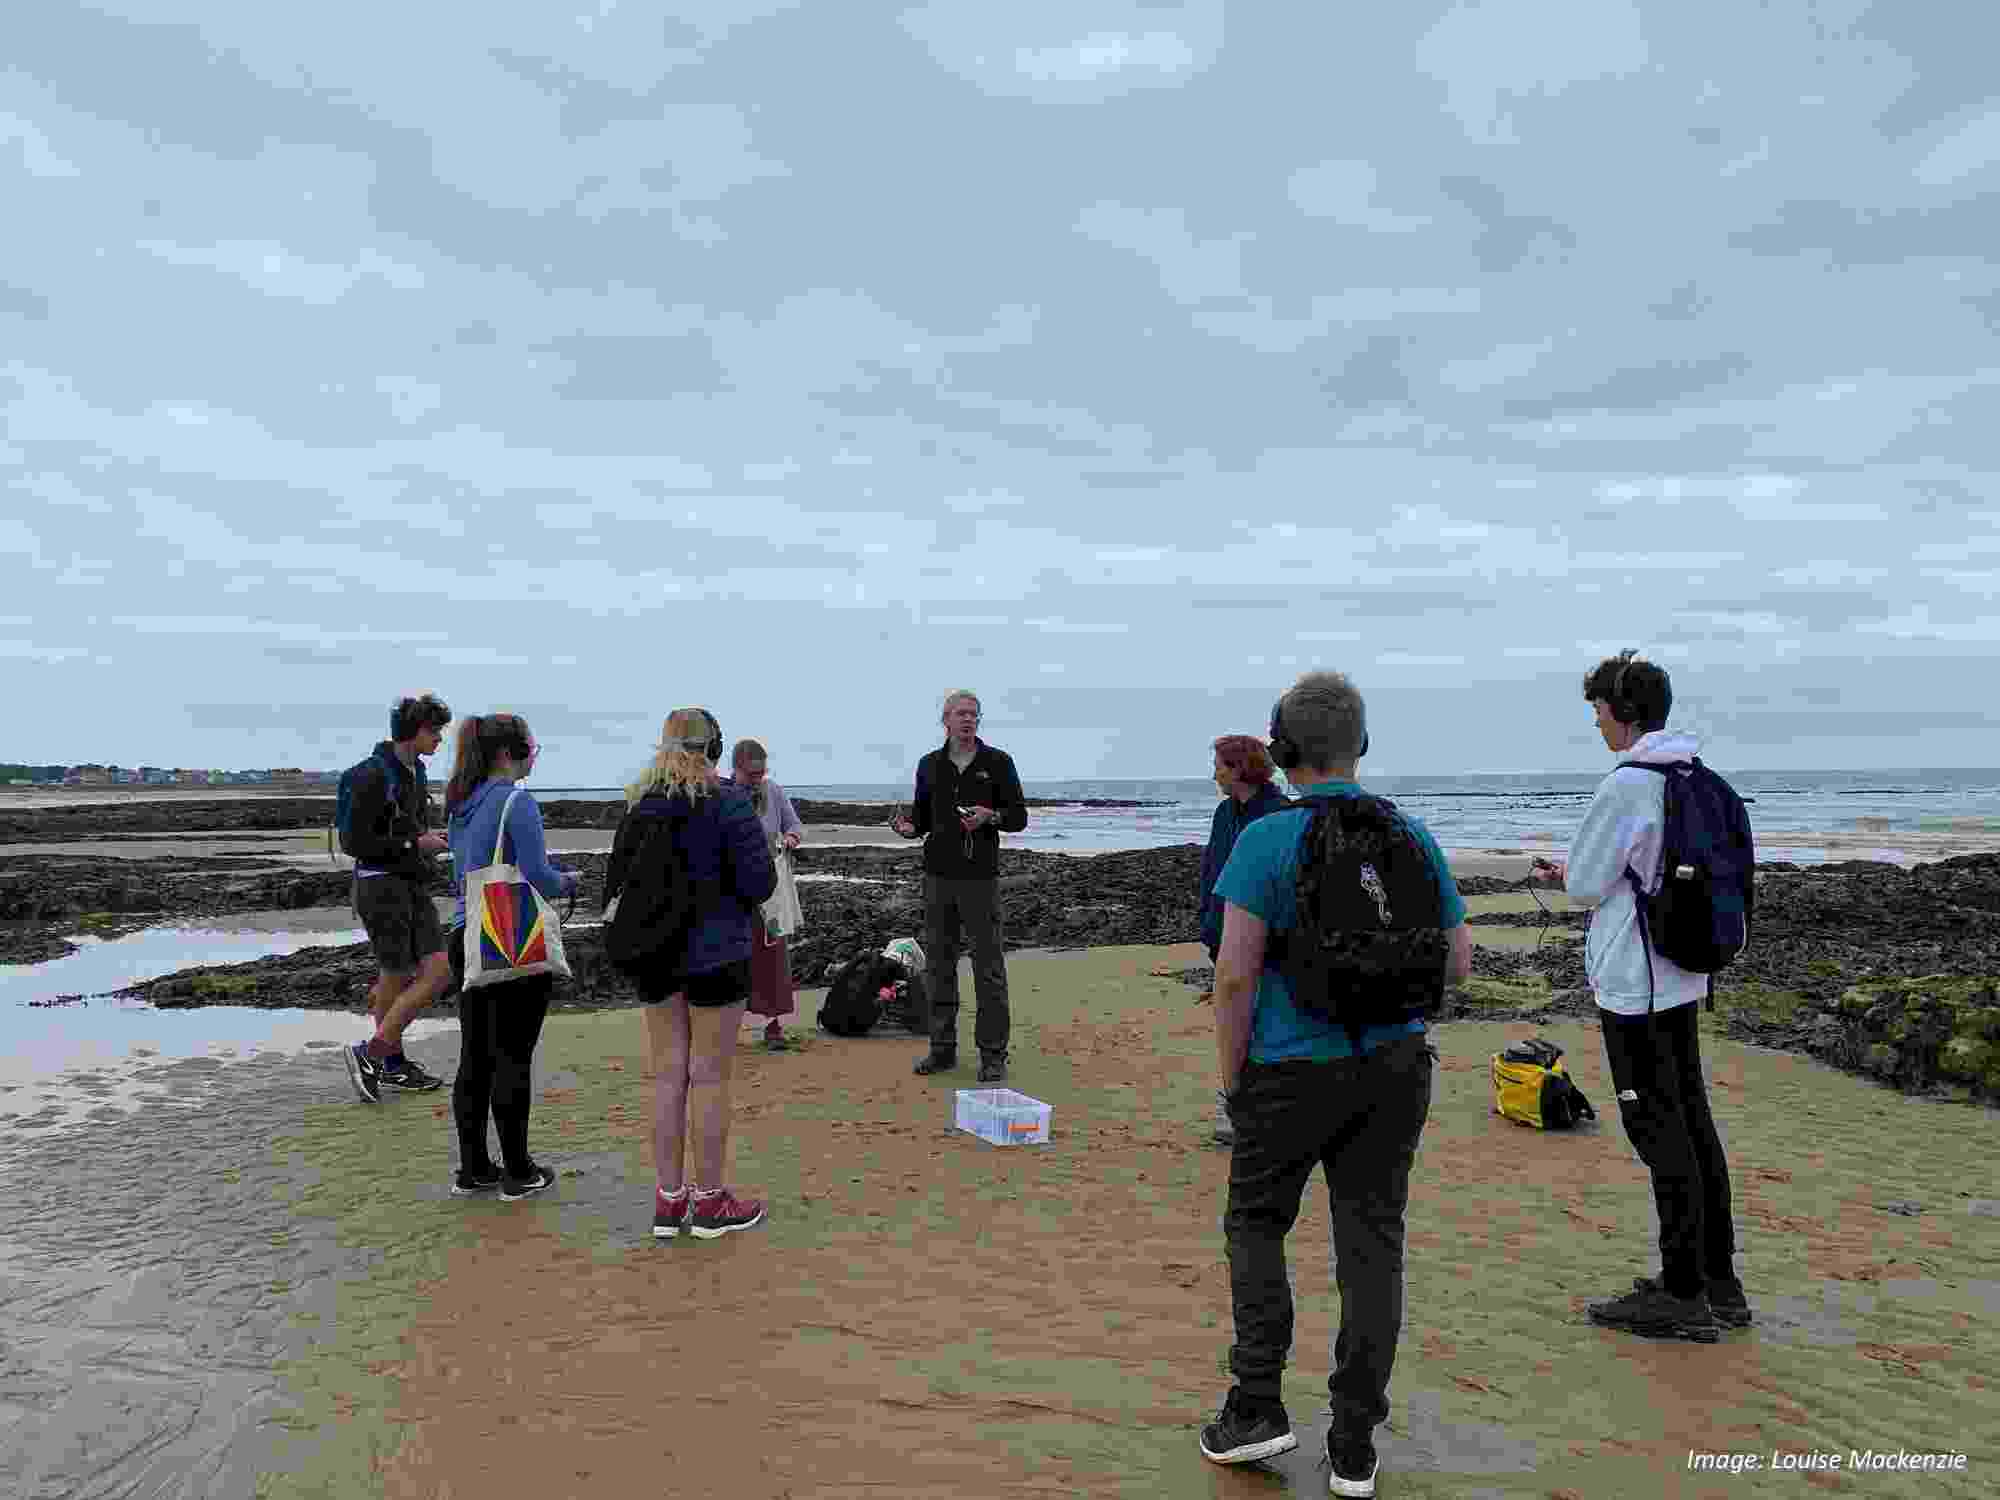 Eight people stand in a circle near to some rocks on the seashore